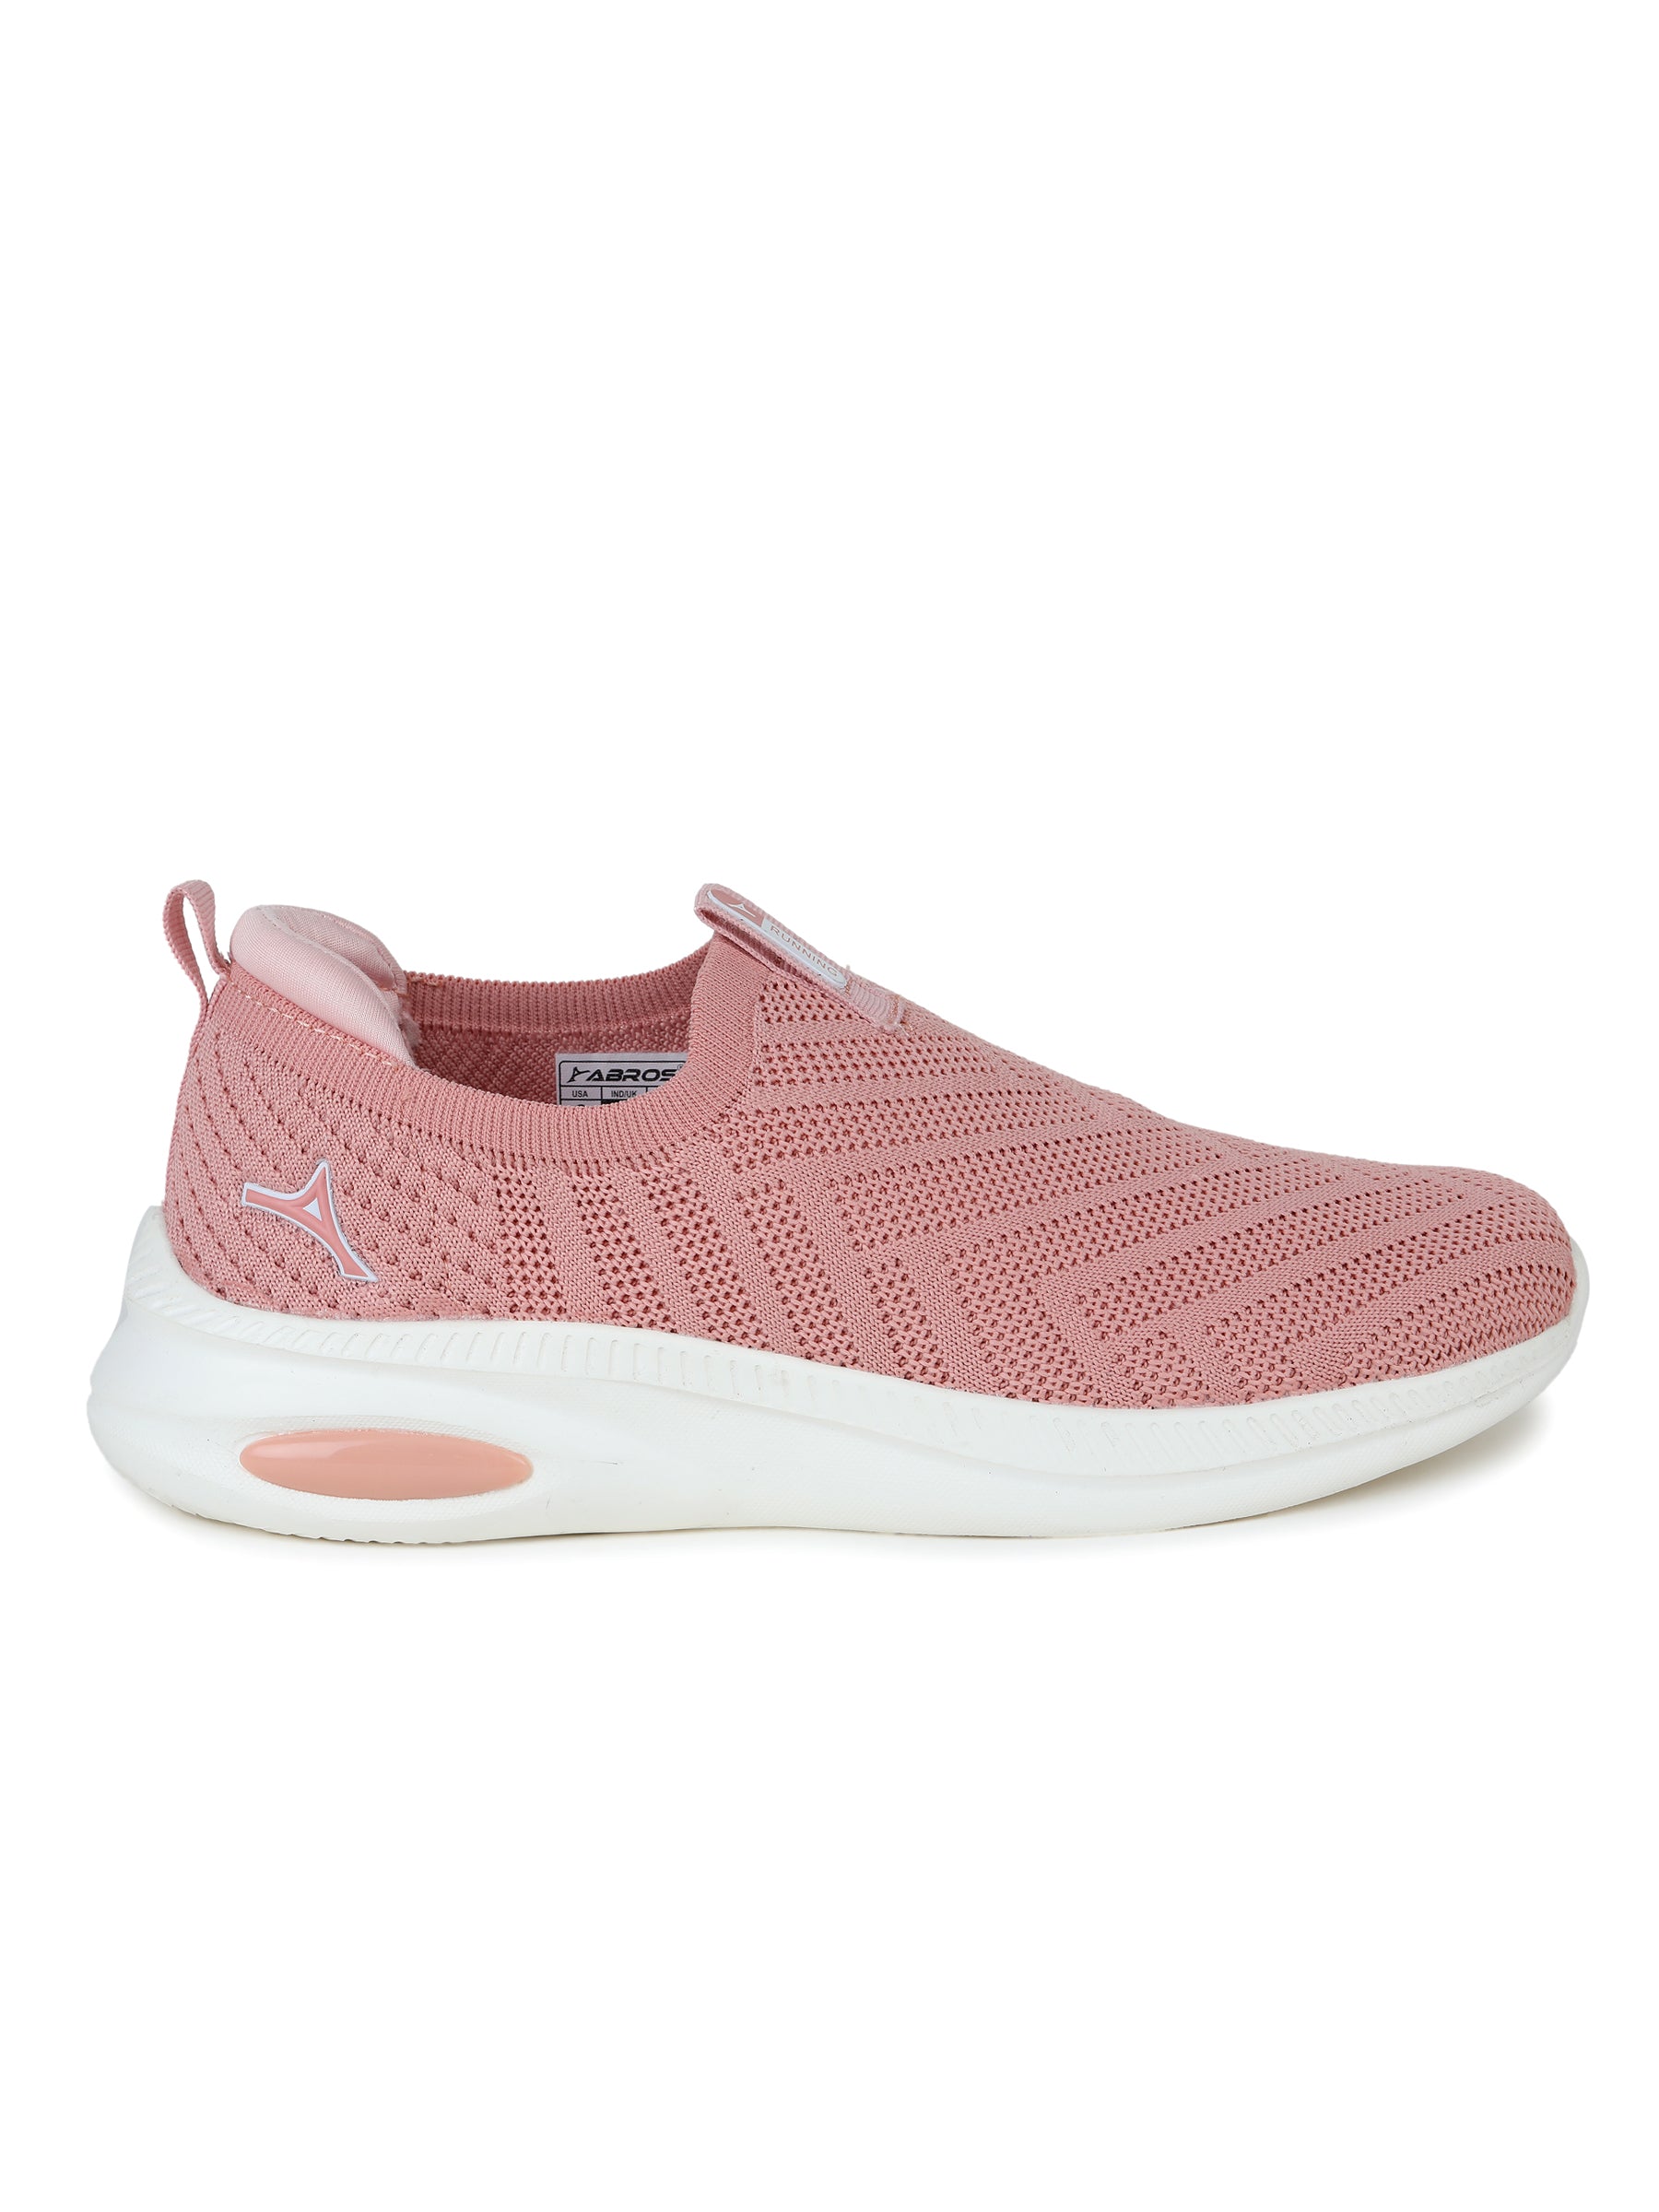 ABROS LOTUS SPORTS SHOES FOR WOMEN